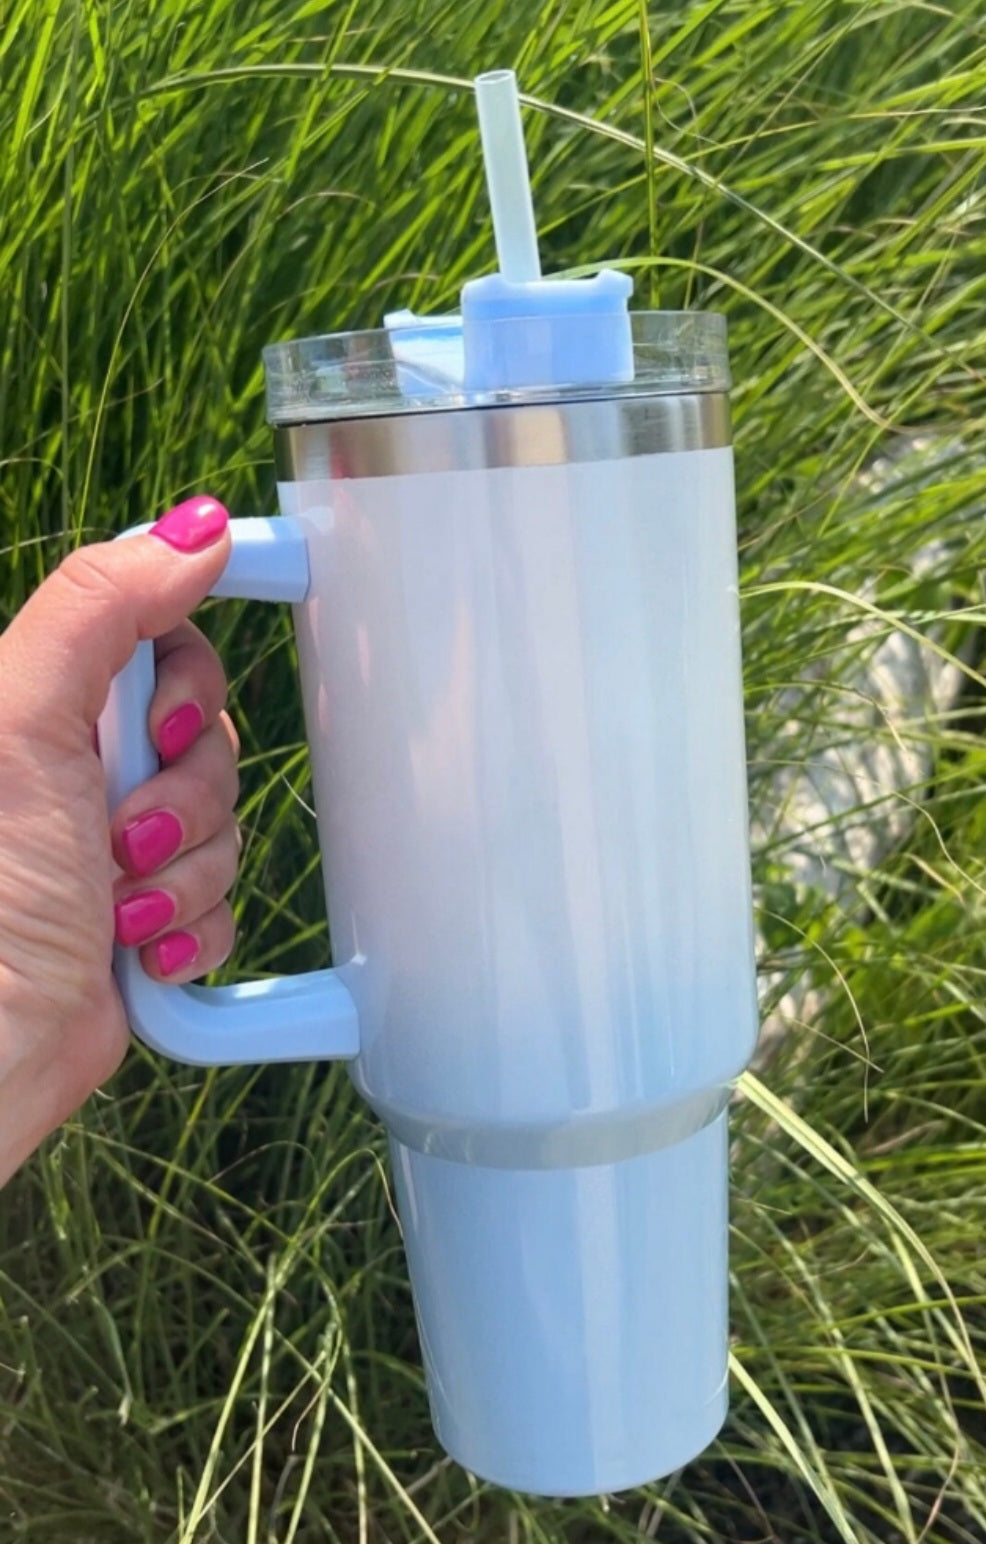 40 oz Shimmer Tumbler with Handle in Light Pink